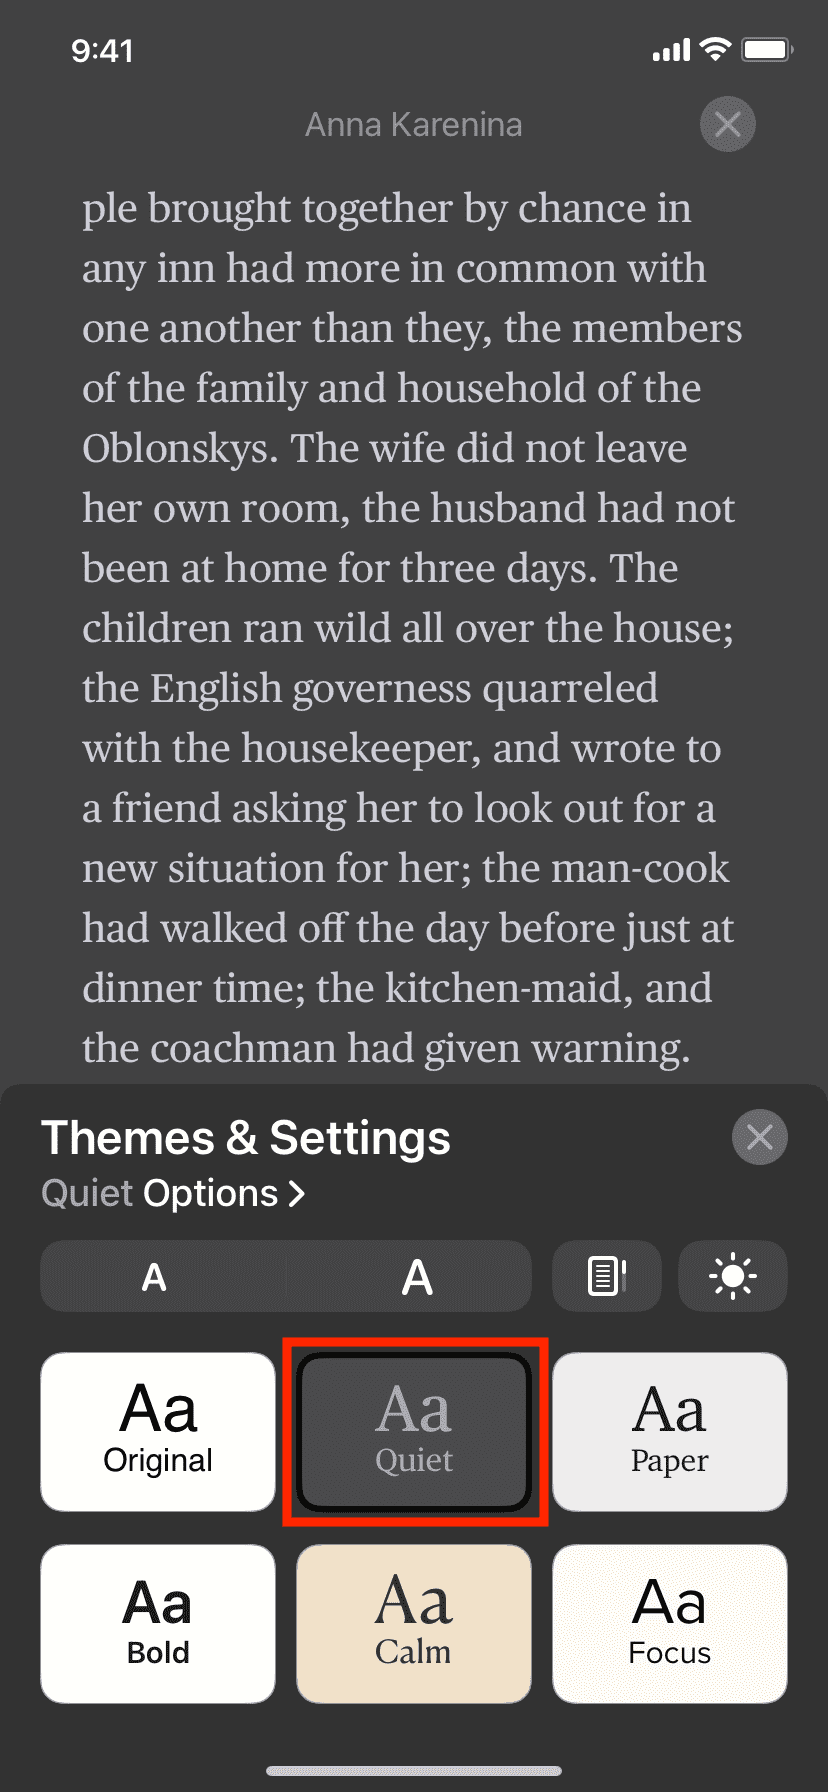 Quiet theme appears like Dark Mode in iPhone Books app